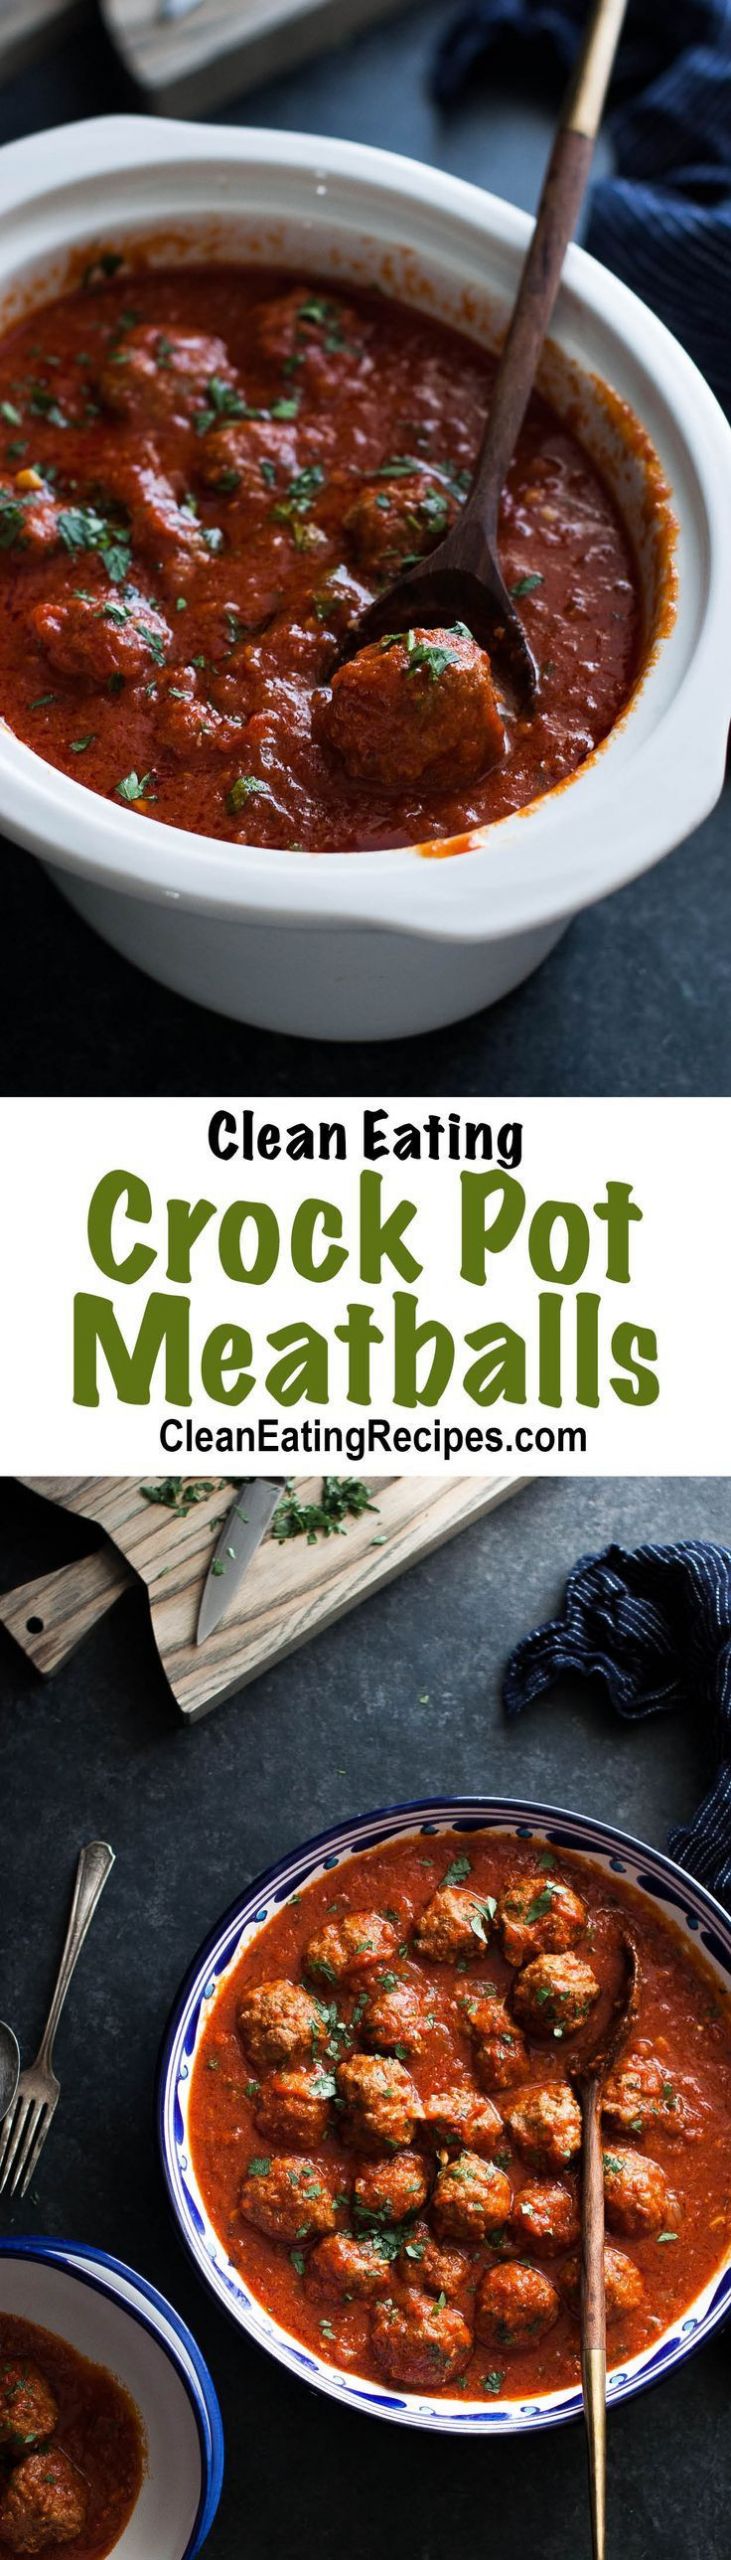 Clean Eating Meatballs
 Clean Eating Crock Pot Spaghetti Sauce with Meatballs